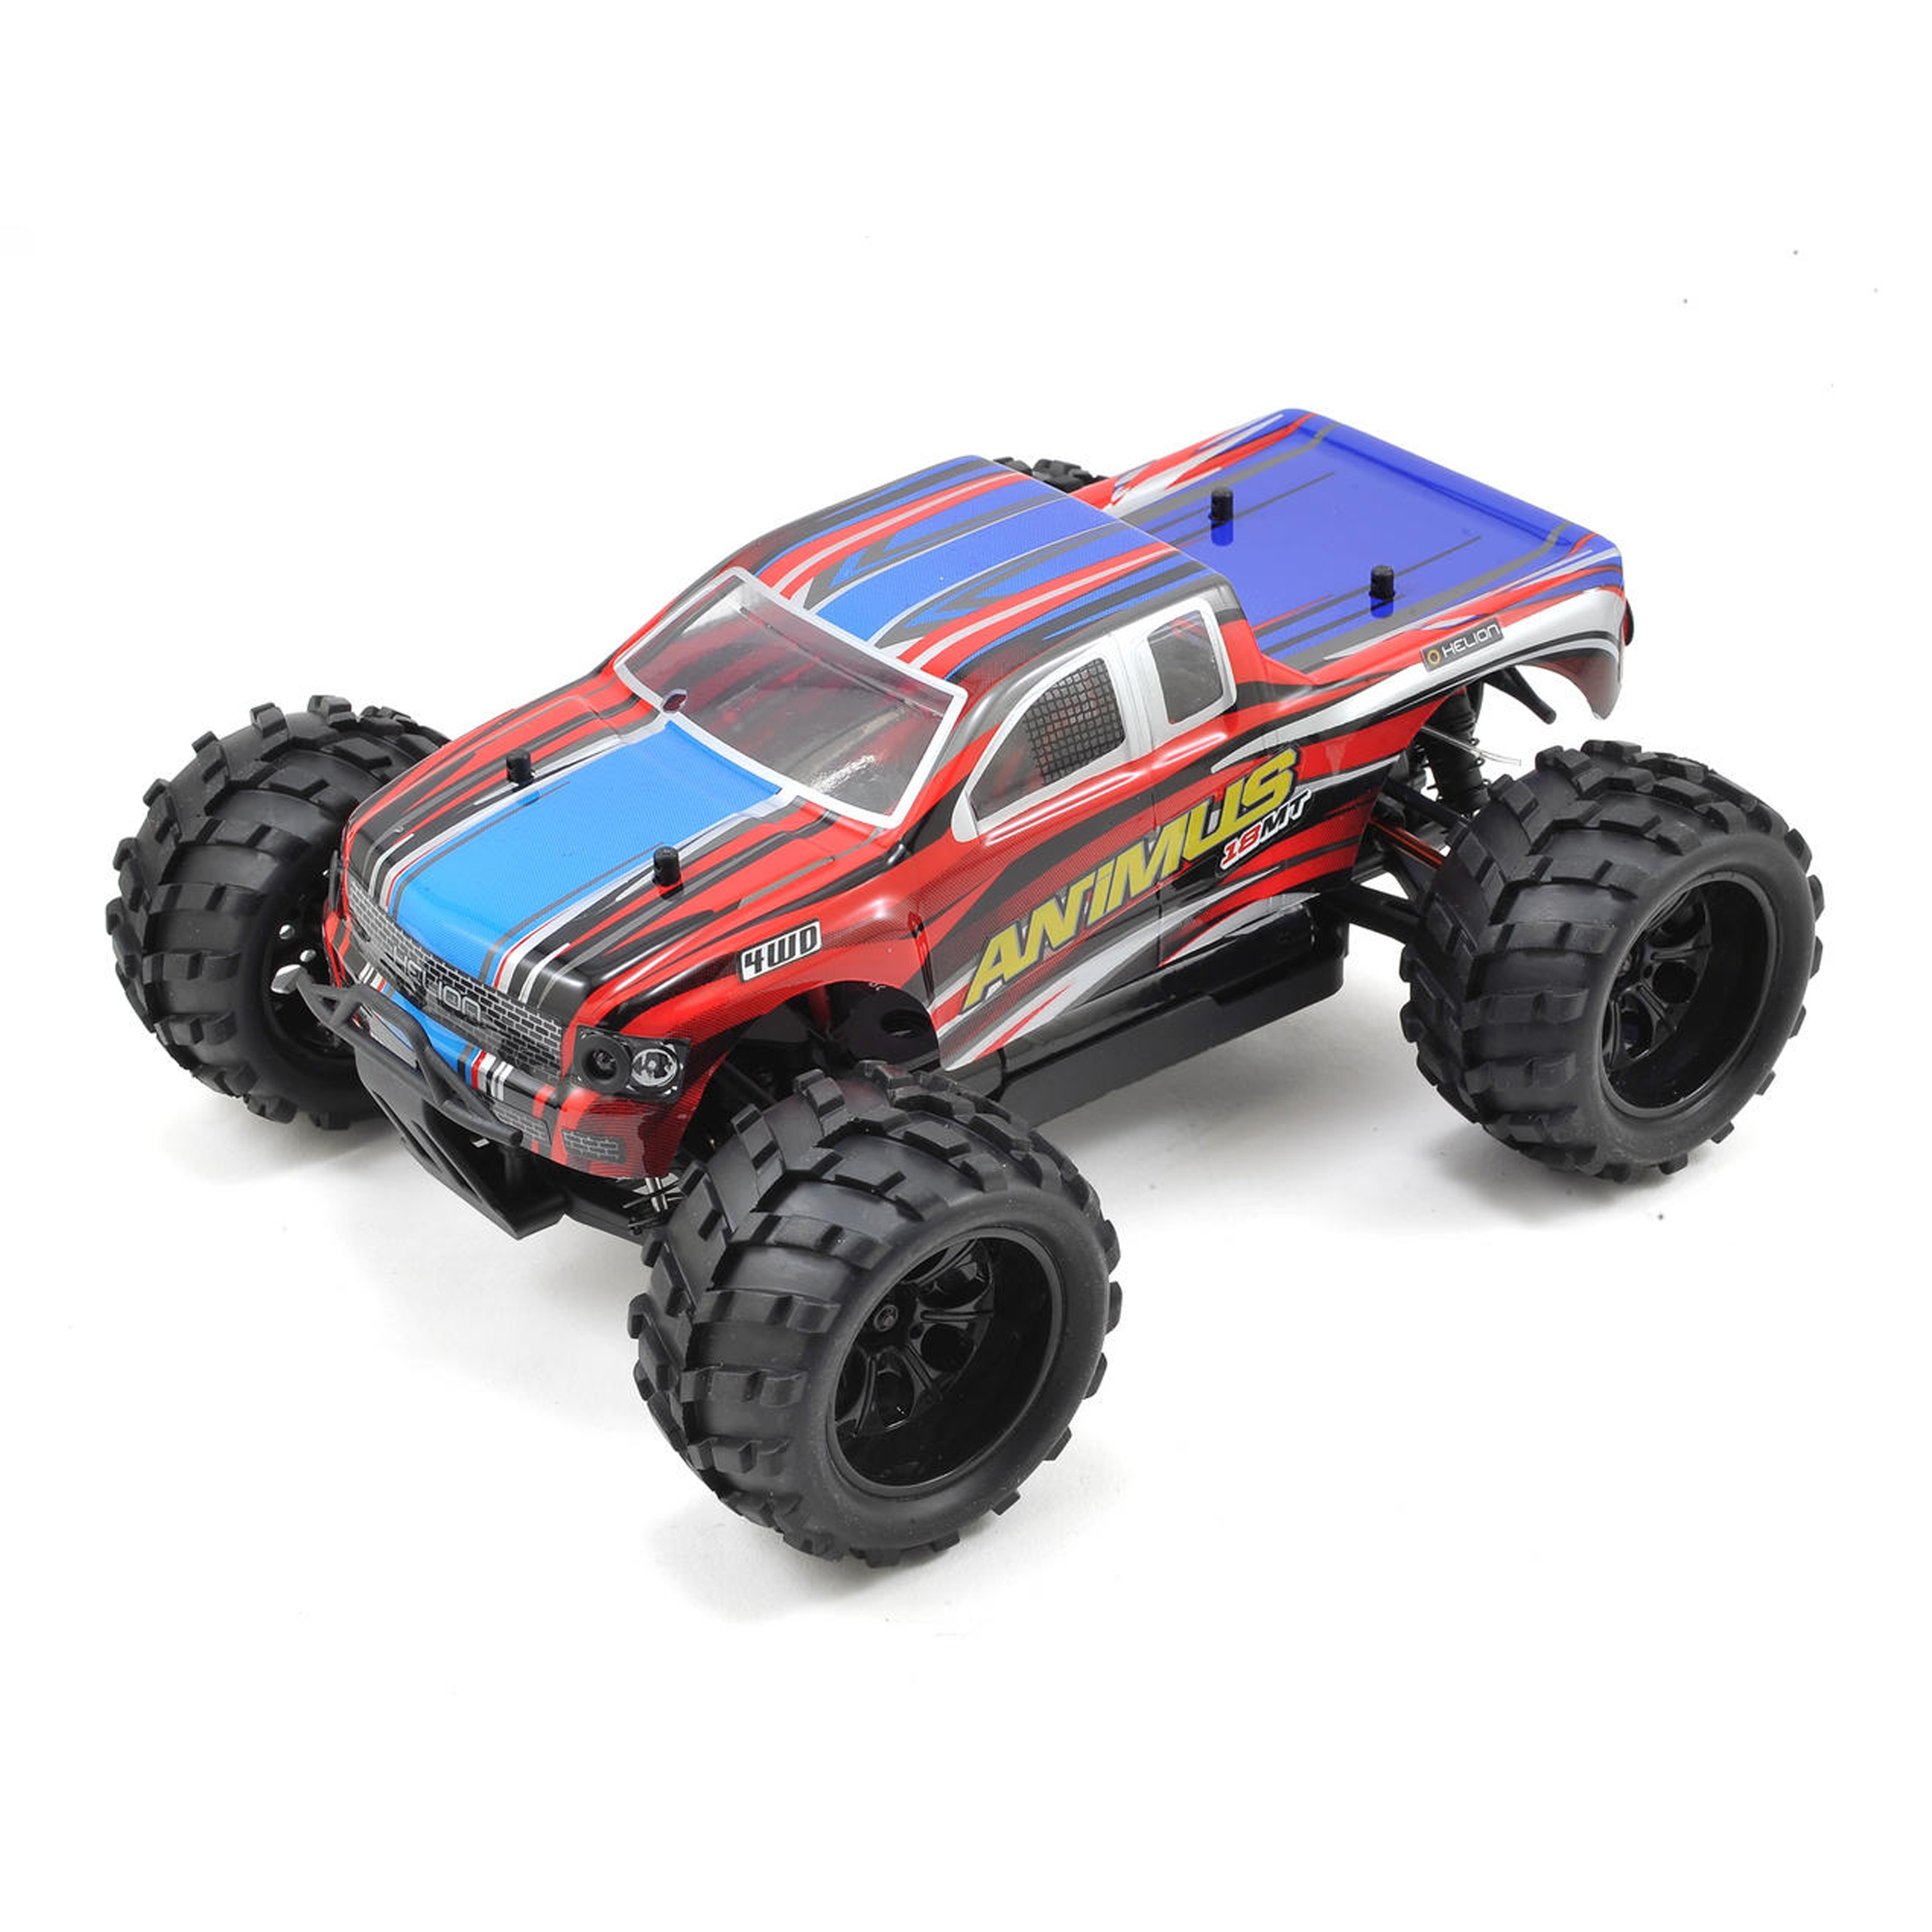 Image of Helion Animus 18MT (G2) 1:18 Scale 4x4 RC Truck